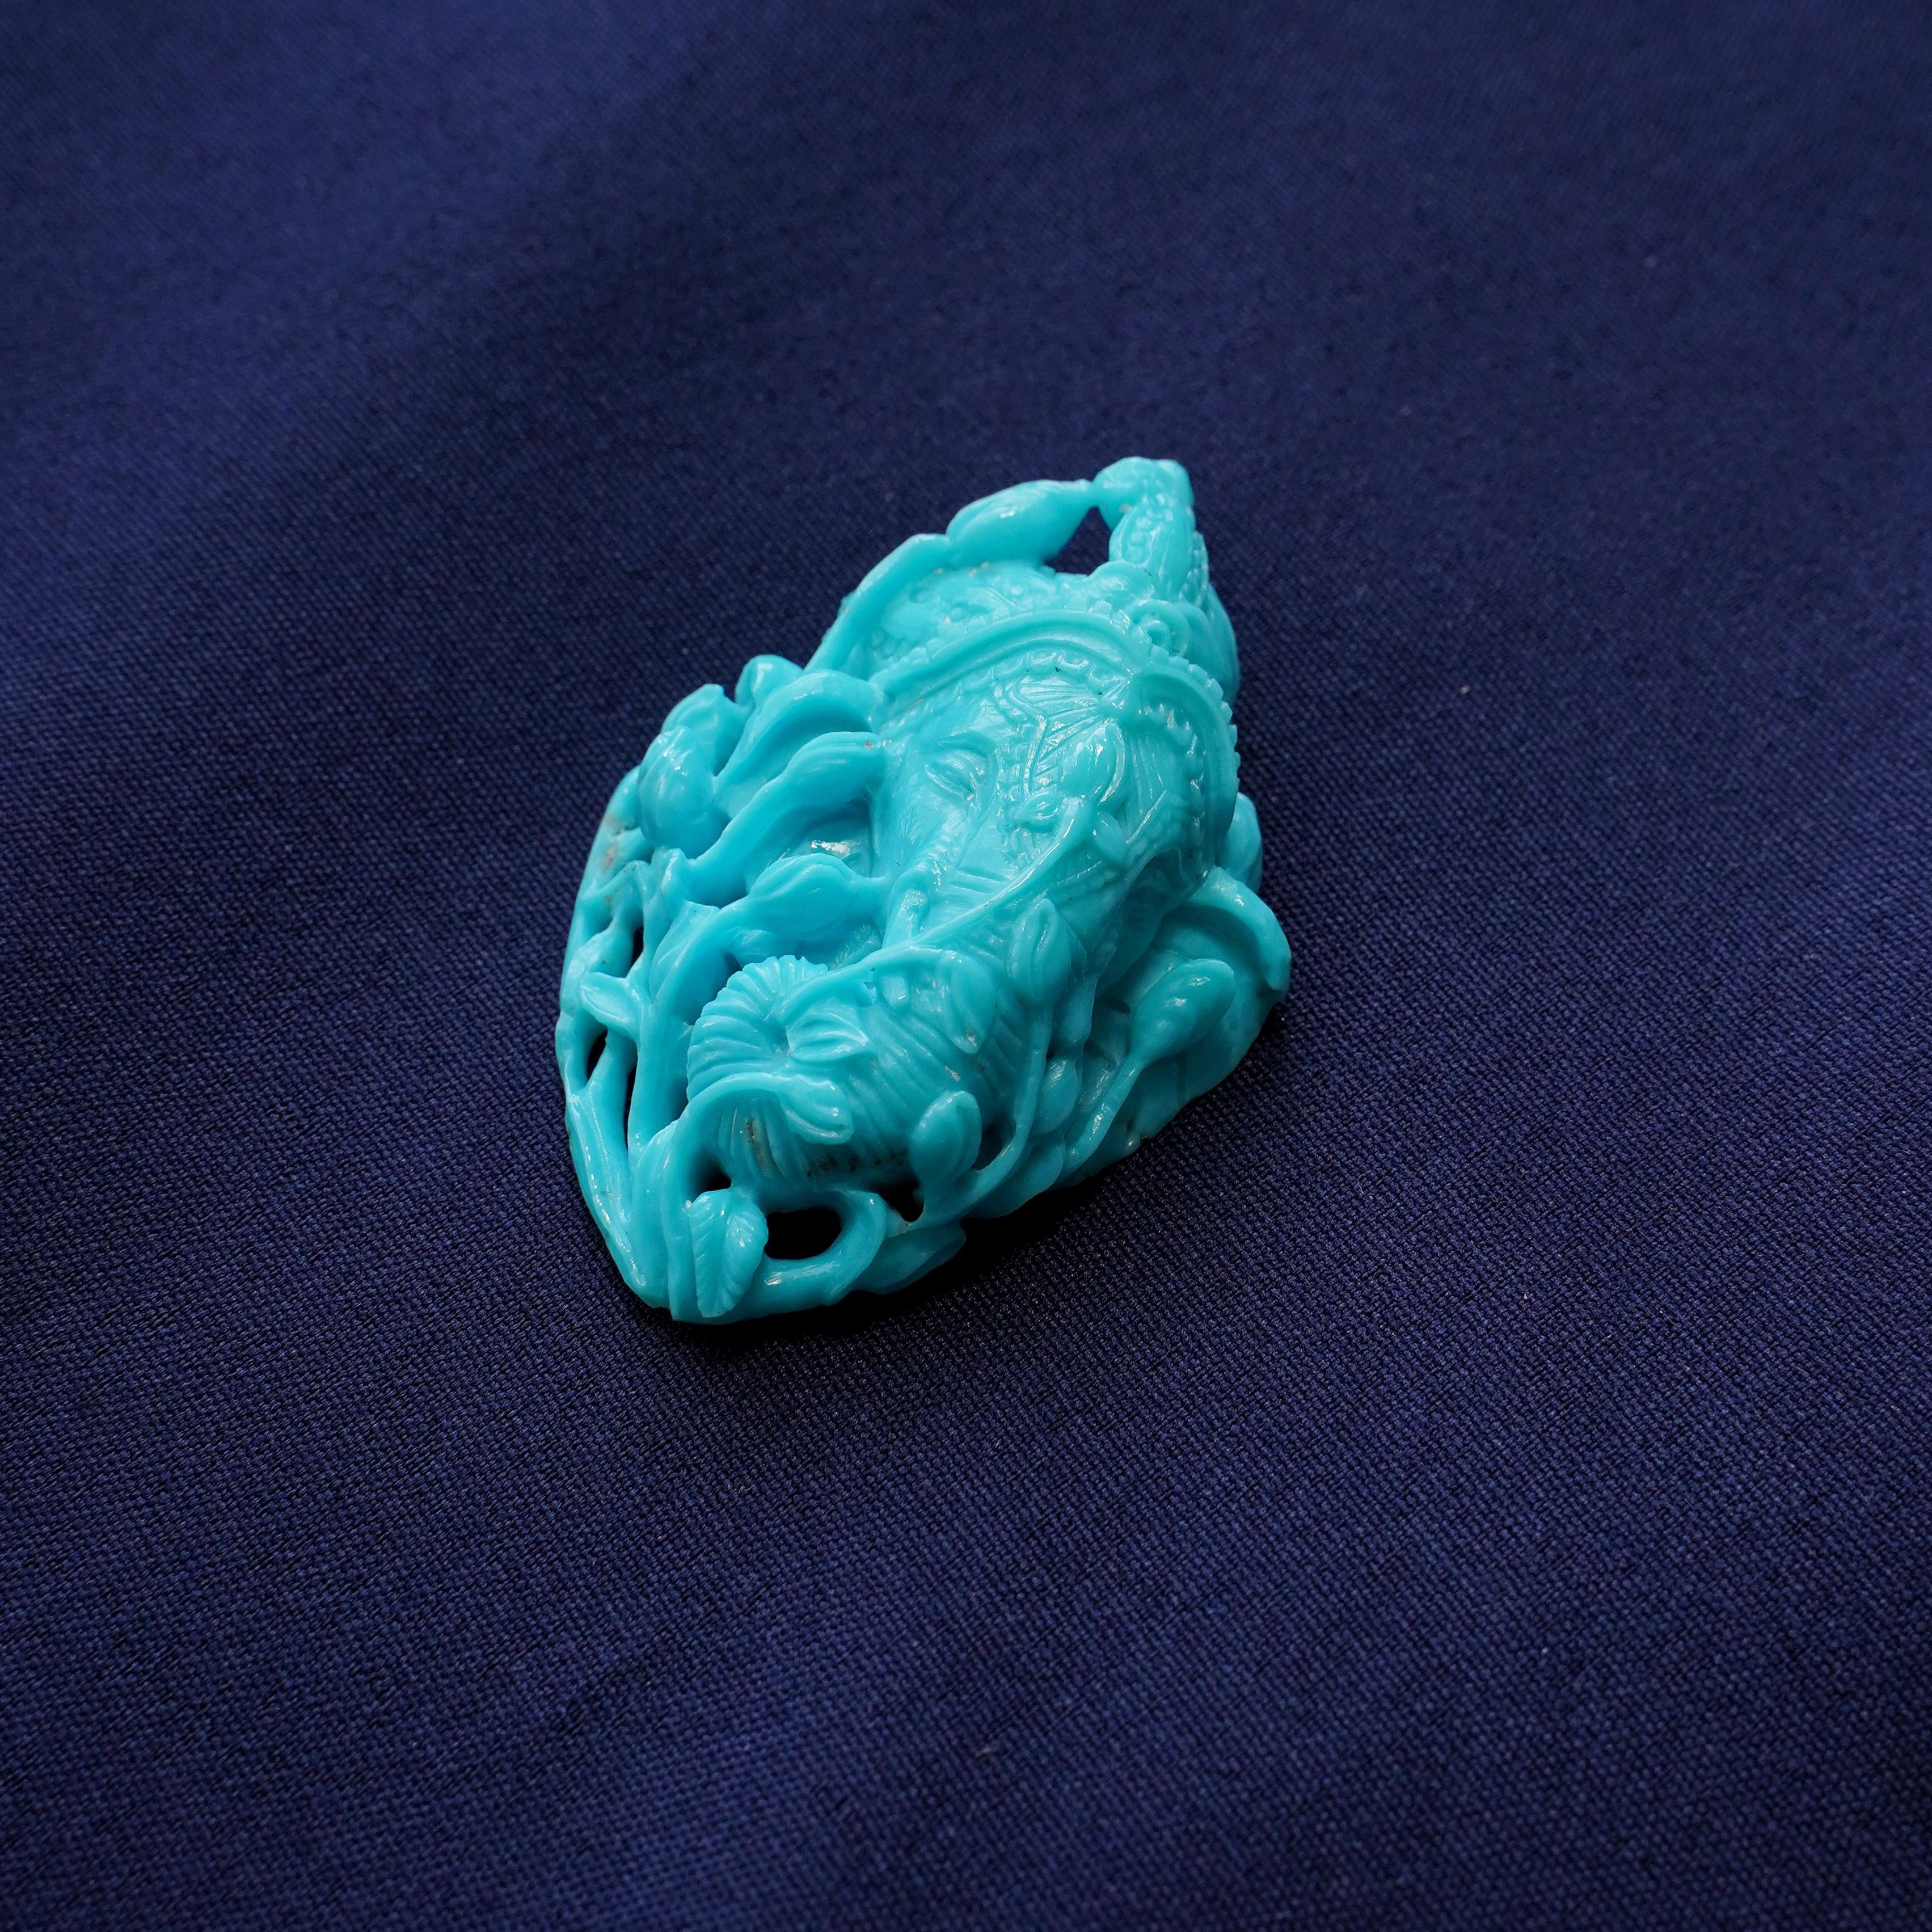 93.86 Carat Natural Arizona Turquoise Ganesha Carving Pendant Brooch In New Condition For Sale In Jaipur, Rajasthan